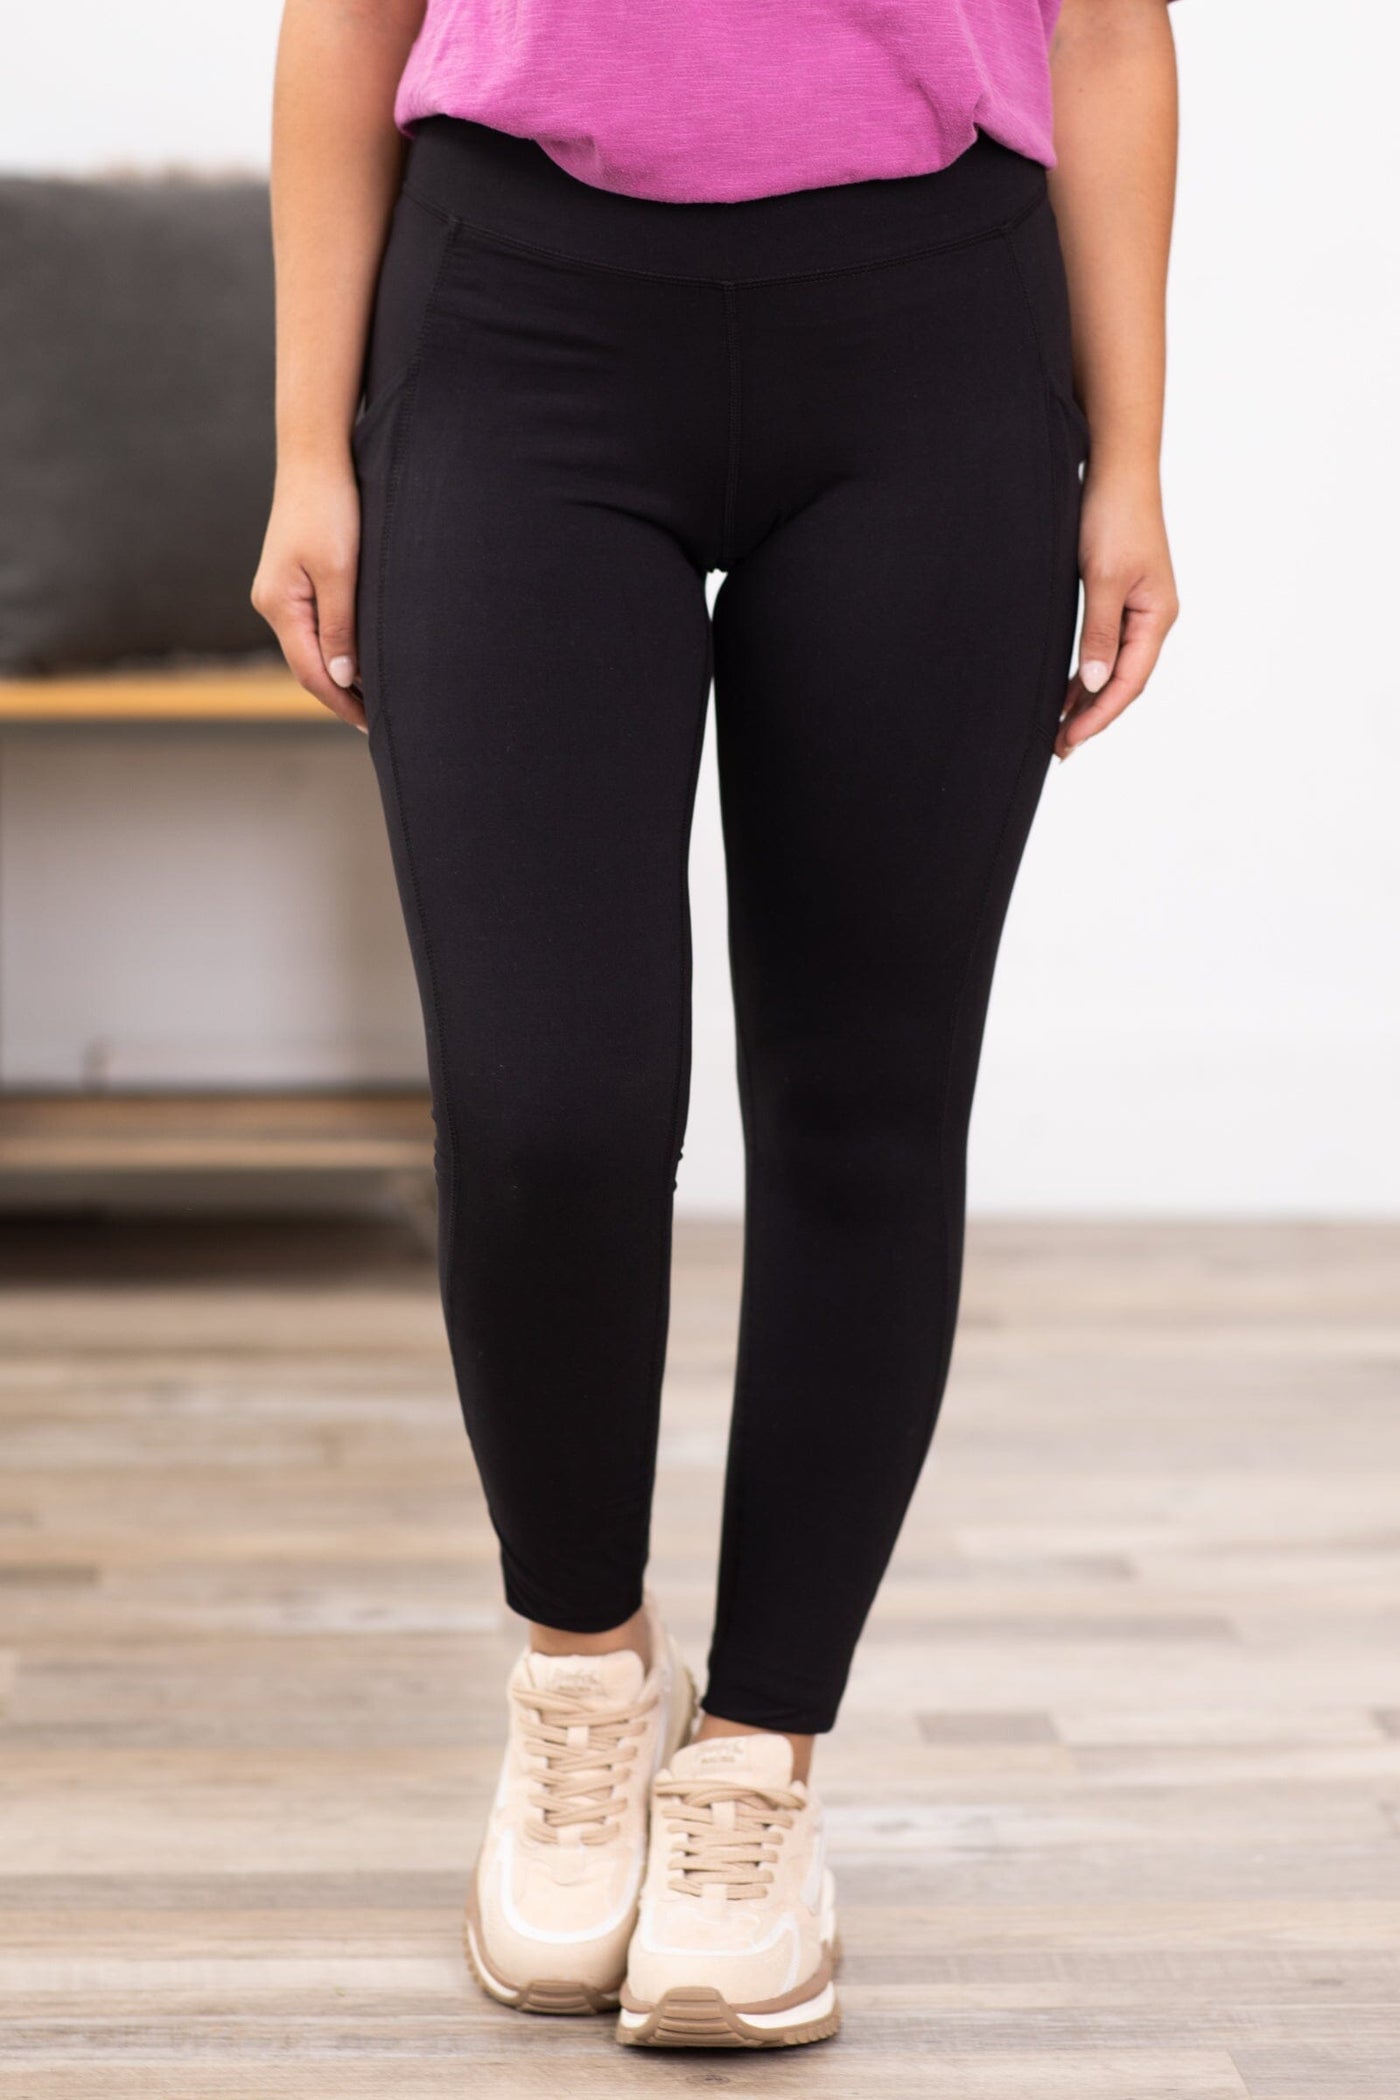 Black Buttery Soft Leggings With Side Pocket - Filly Flair